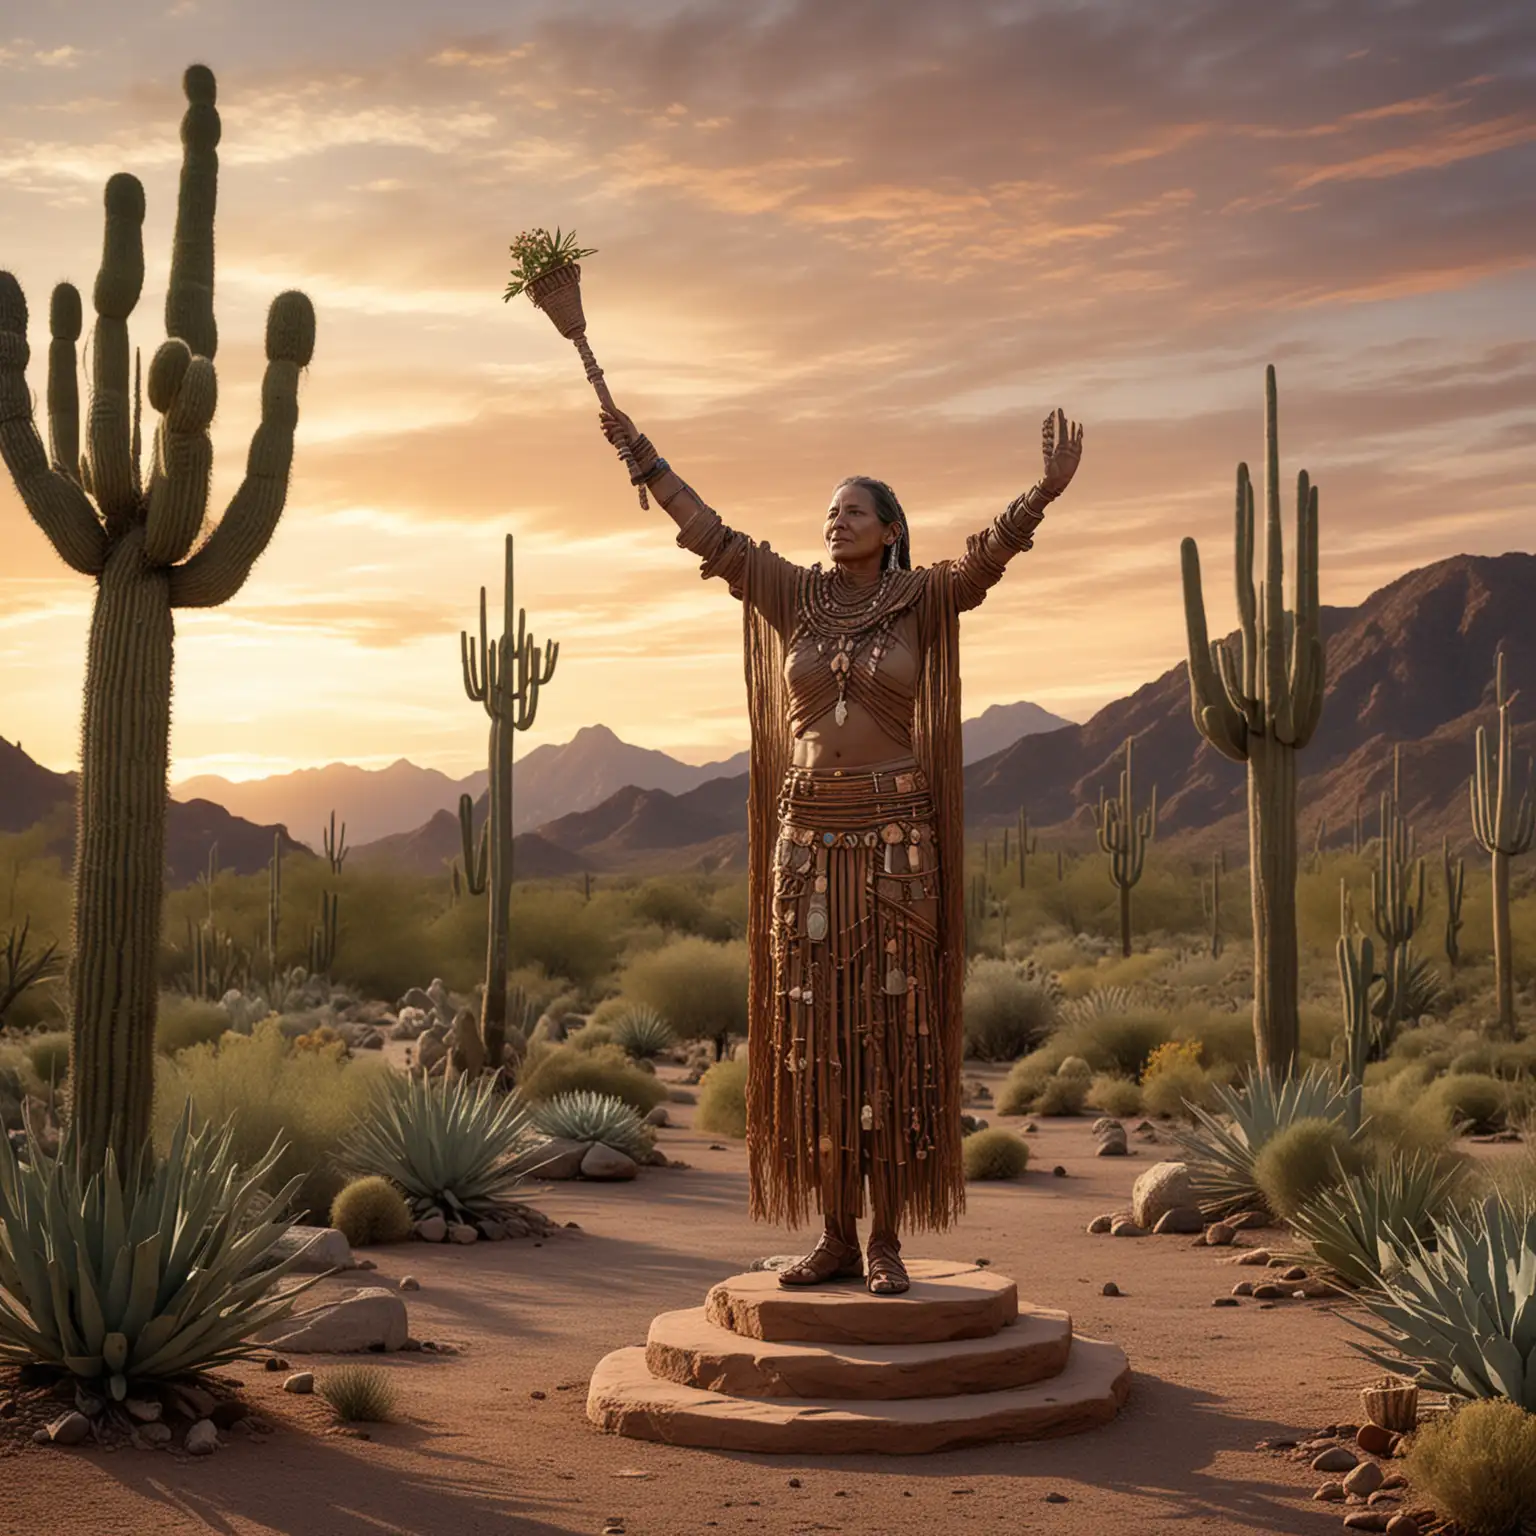 Create a Desert Garden Plaza in Tucson with a  towering figure with arms open (100 ft tall) on a huge pedestal of a Tohono O'odham elder made from copper or bronze, holding a traditional basket and staff, overlooking the Sonoran Desert. Please add a lighting element that can shine brightly in the Arizona desert. Create in a desert sunset.
Representation: Honors the Indigenous peoples of the region and symbolizes protection, wisdom, and the deep connection to the land.
Design Elements: The elder’s garments could be adorned with traditional patterns, and the base could be surrounded by native cacti and flora.